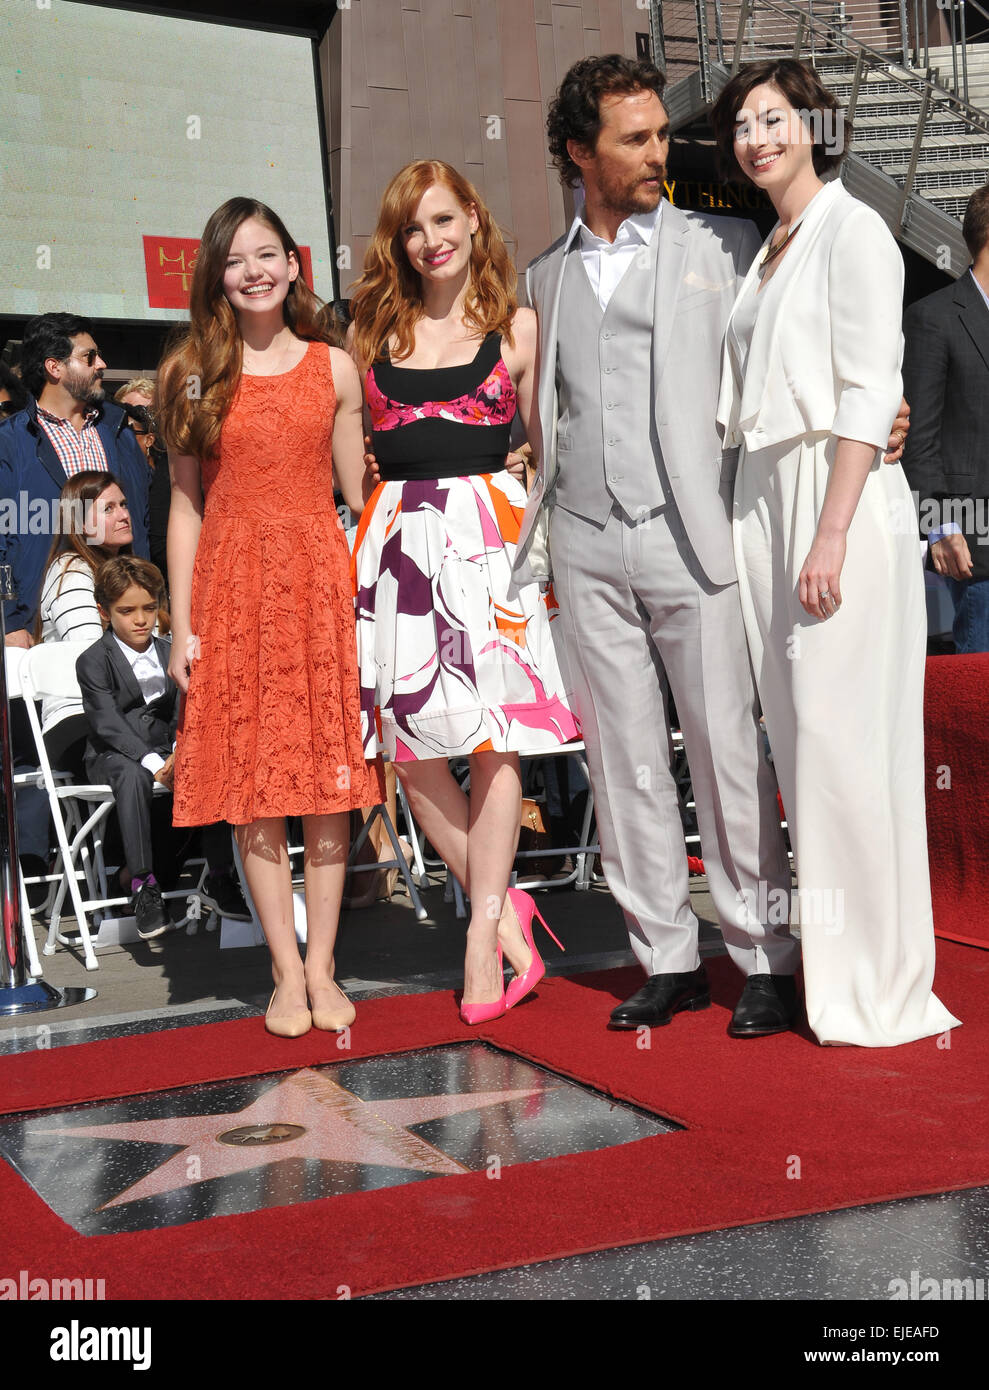 LOS ANGELES, CA - NOVEMBER 17, 2014: Actor Matthew McConaughey with Interstellar co-stars Mackenzie Foy (left), Jessica Chastain & Anne Hathaway on Hollywood Boulevard where he was honored with the 2,534th star on the Hollywood Walk of Fame. Stock Photo